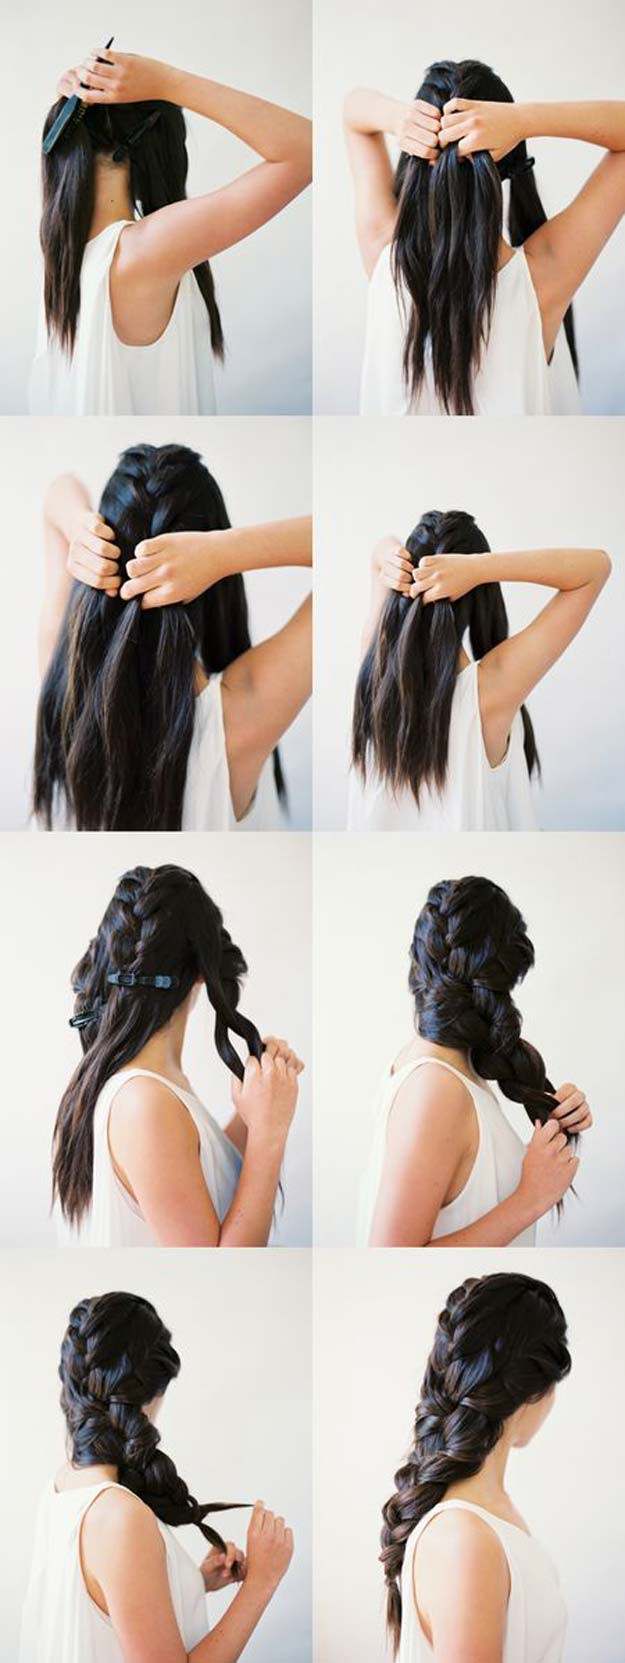 Easy Hairstyles For Medium Hair To Do At Home
 41 DIY Cool Easy Hairstyles That Real People Can Do at